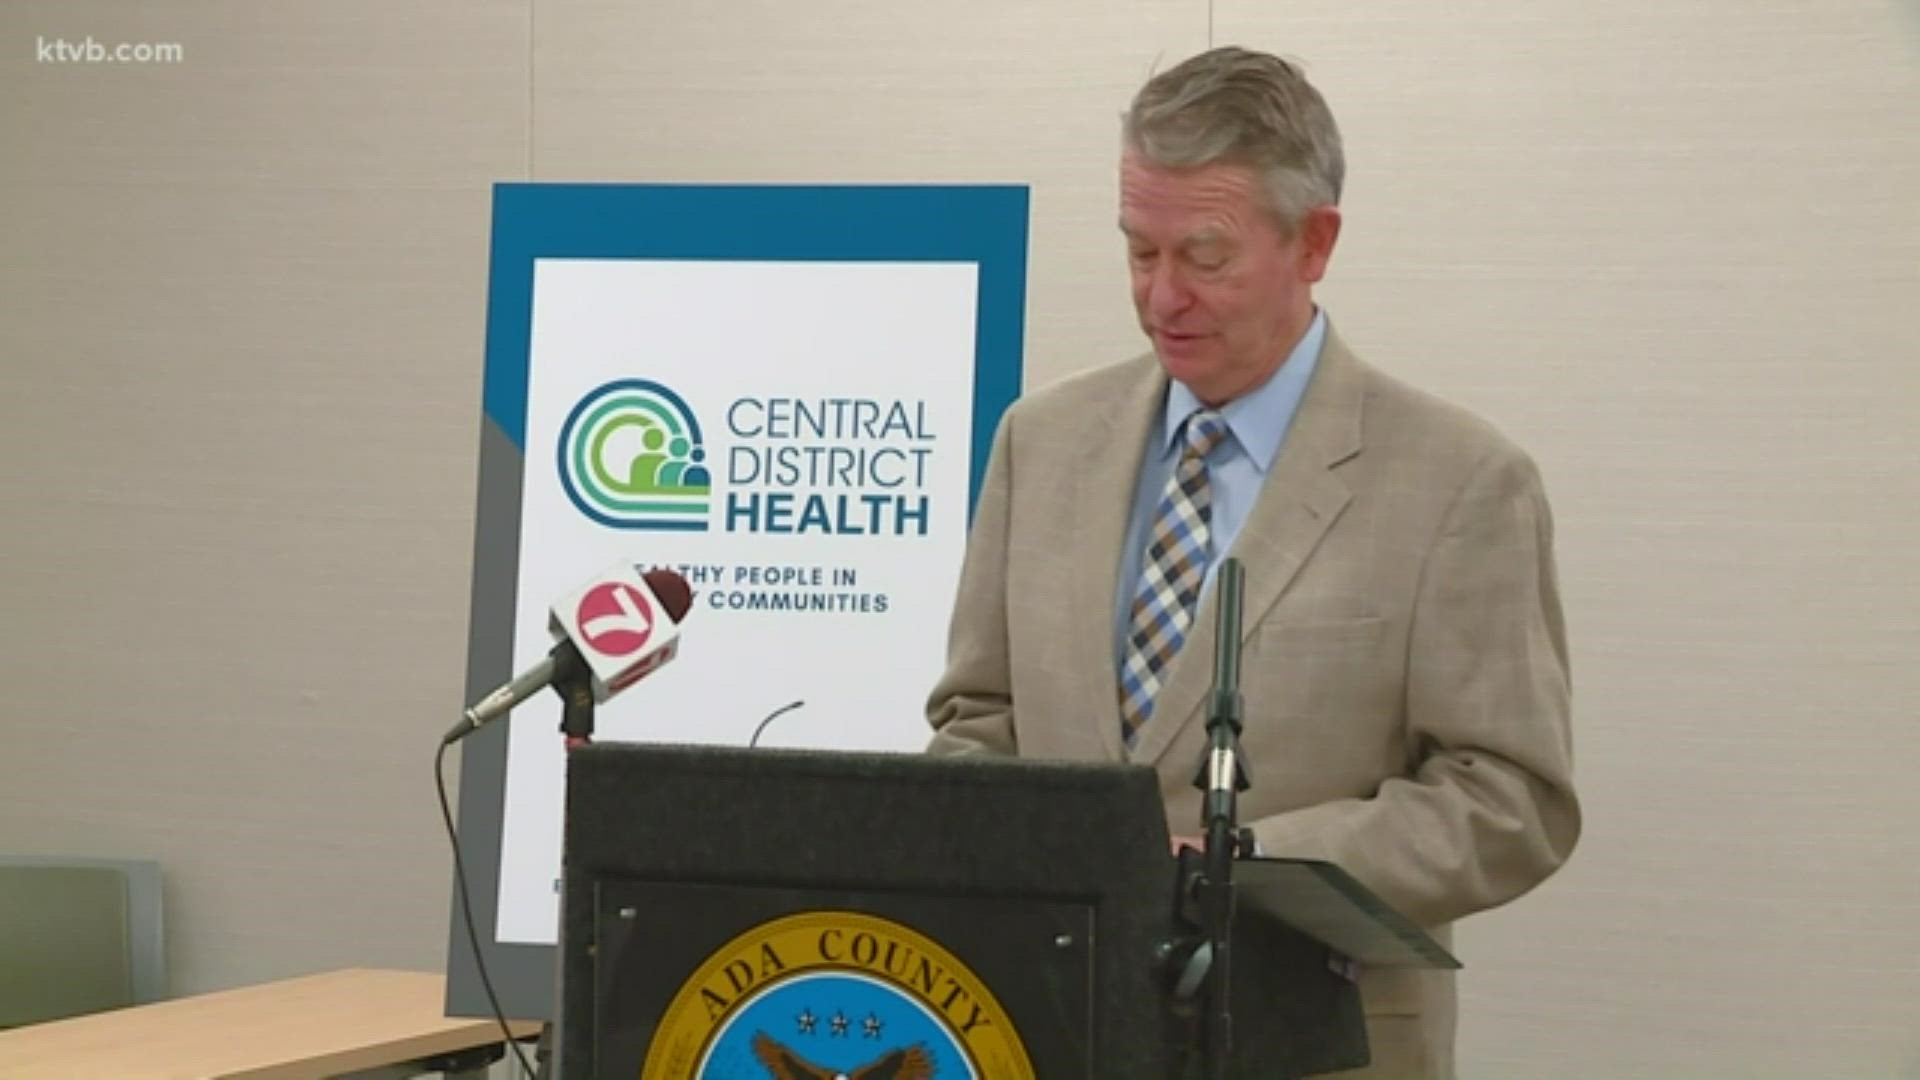 Gov. Little held a press conference on July 23 to discuss the rapid increase in coronavirus cases across the state.